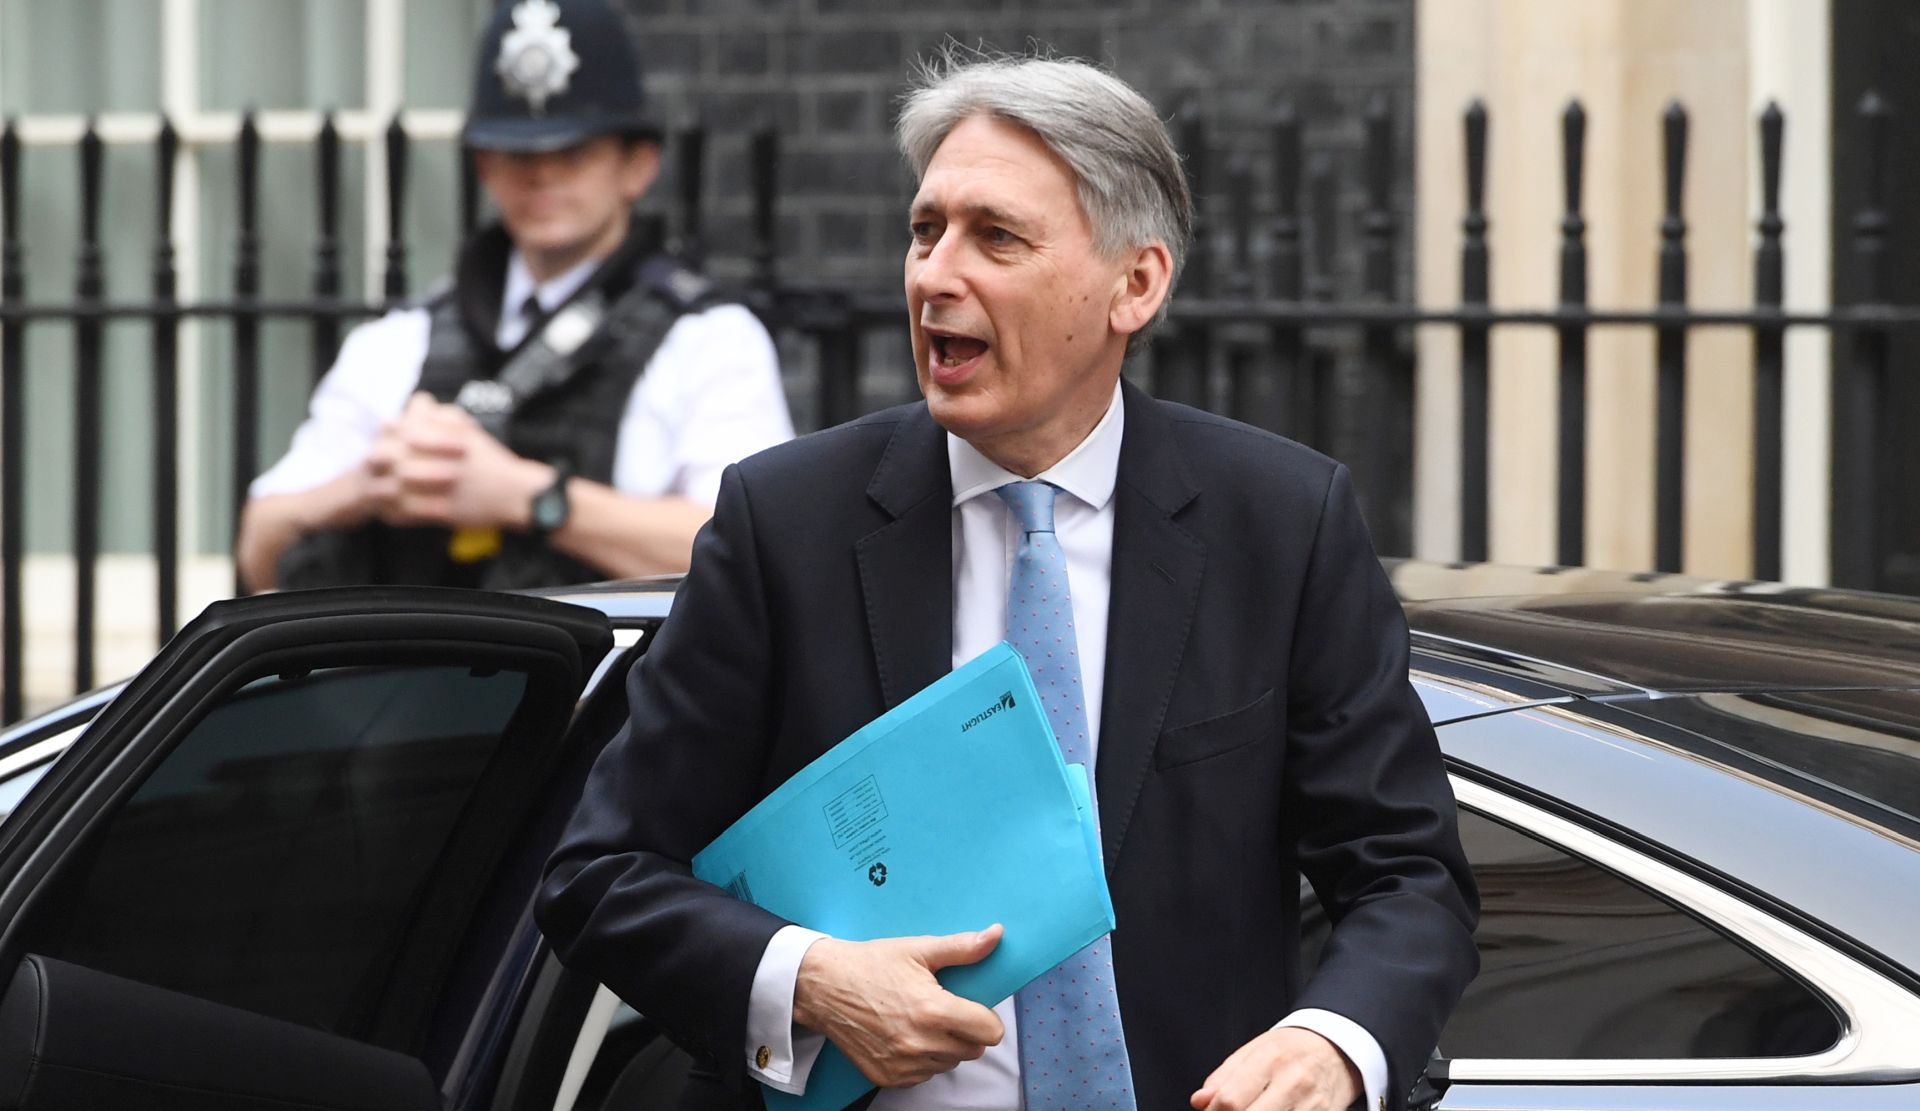 epa07470569 British Chancellor of the Exchequer, Philip Hammond returns to Downing street in London, Britain, 29 March 2019. MPs will vote on the day on the Brexit withdrawal agreement, a legally binding treaty setting out the terms of Britain's departure from the EU.  EPA/FACUNDO ARRIZABALAGA